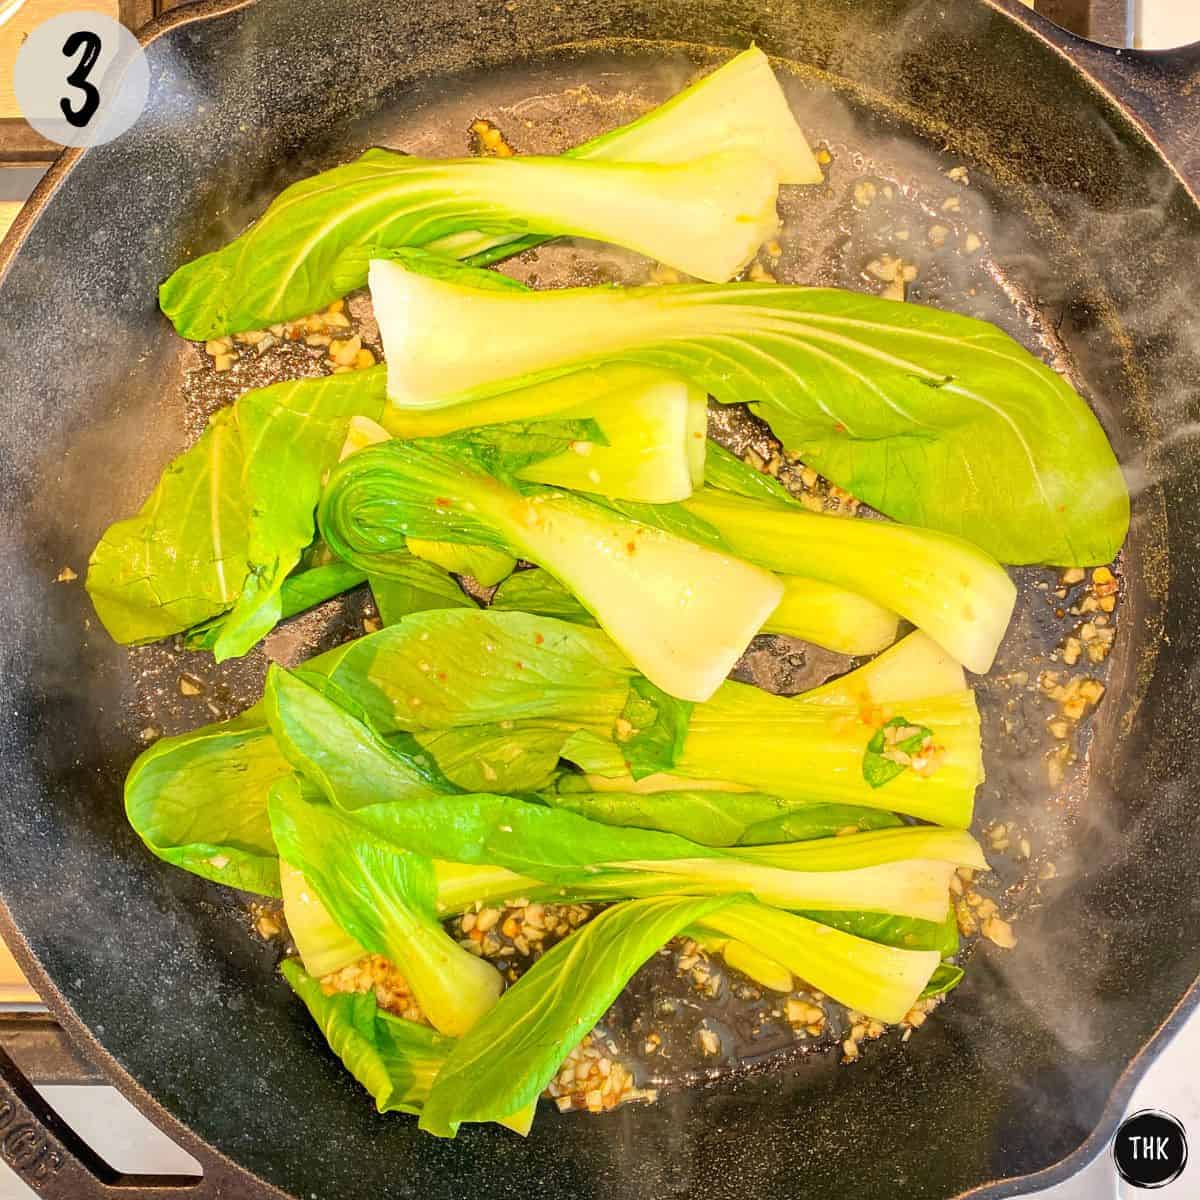 Bok choy being sautéed in cast iron pan.